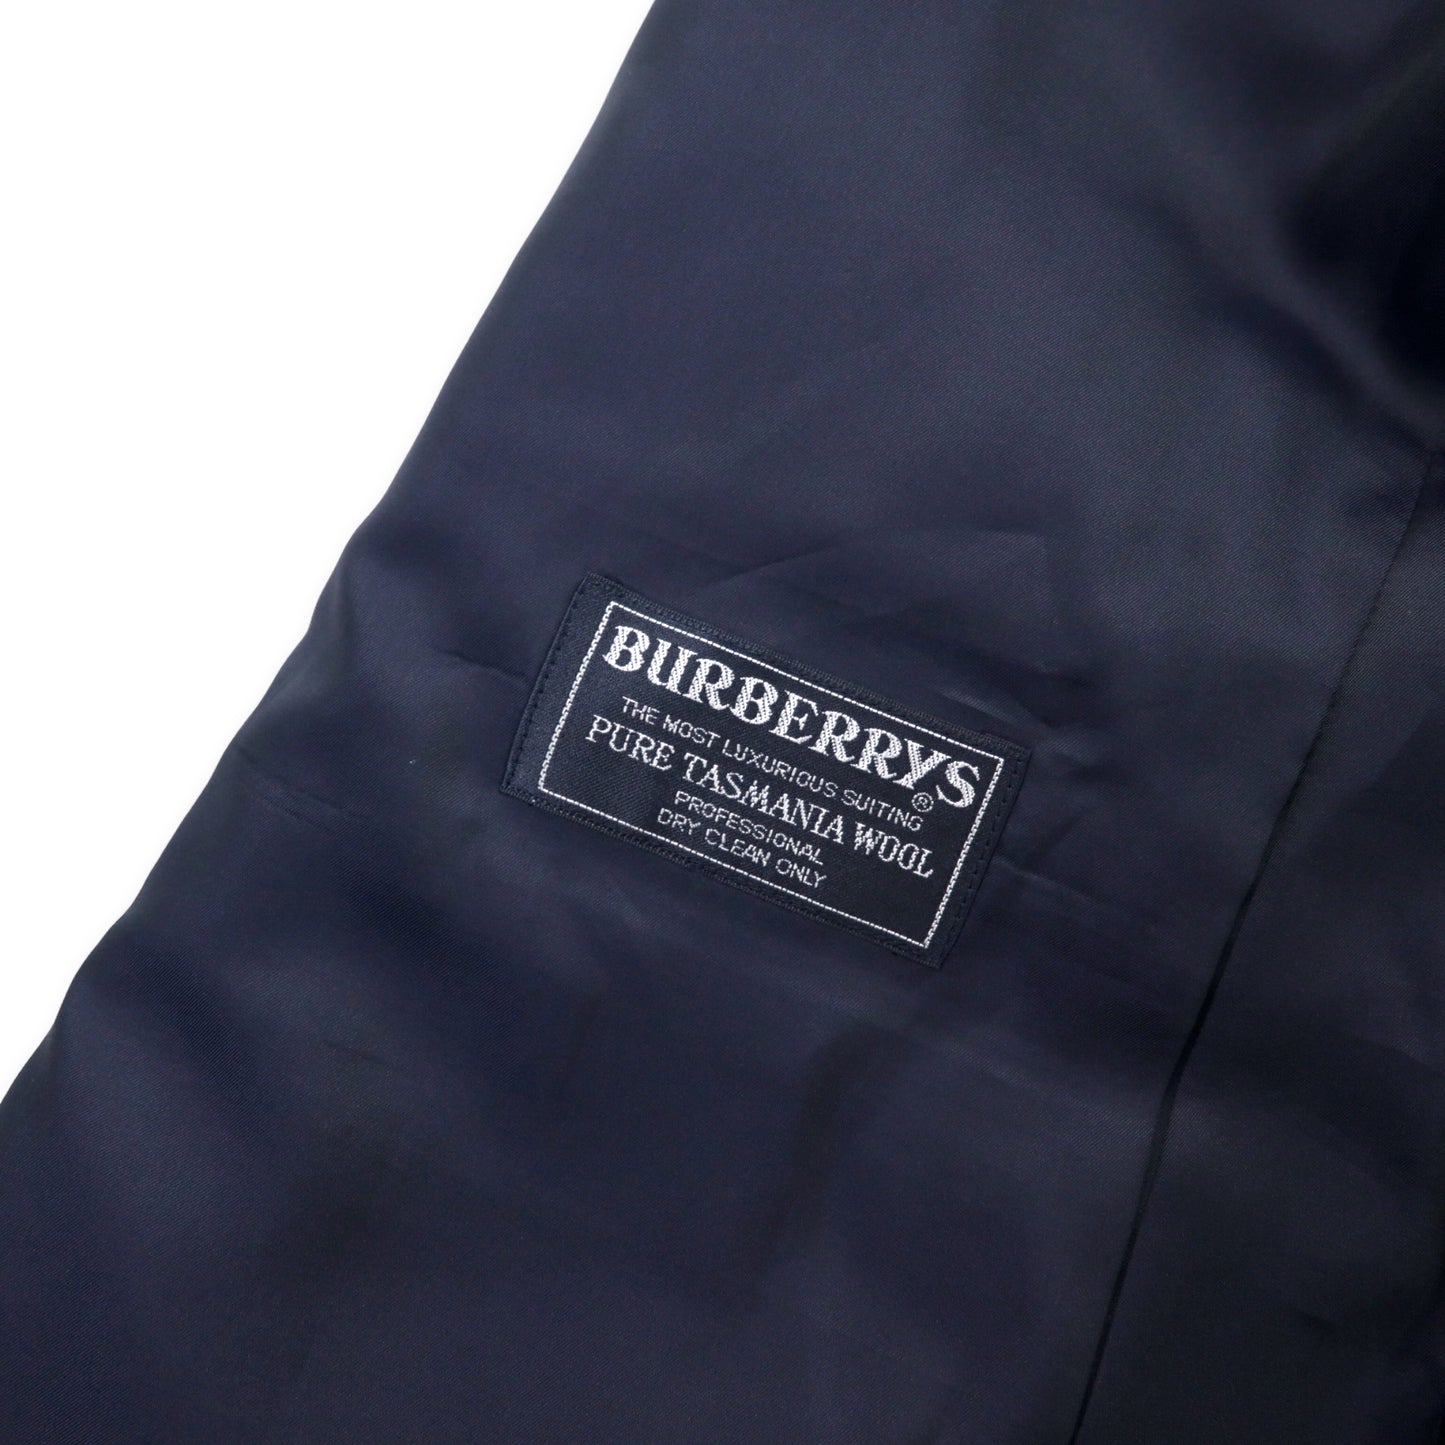 BURBERRYS Double Suit Setup 96-86-170 AB5 Navy Striped Wool Wool